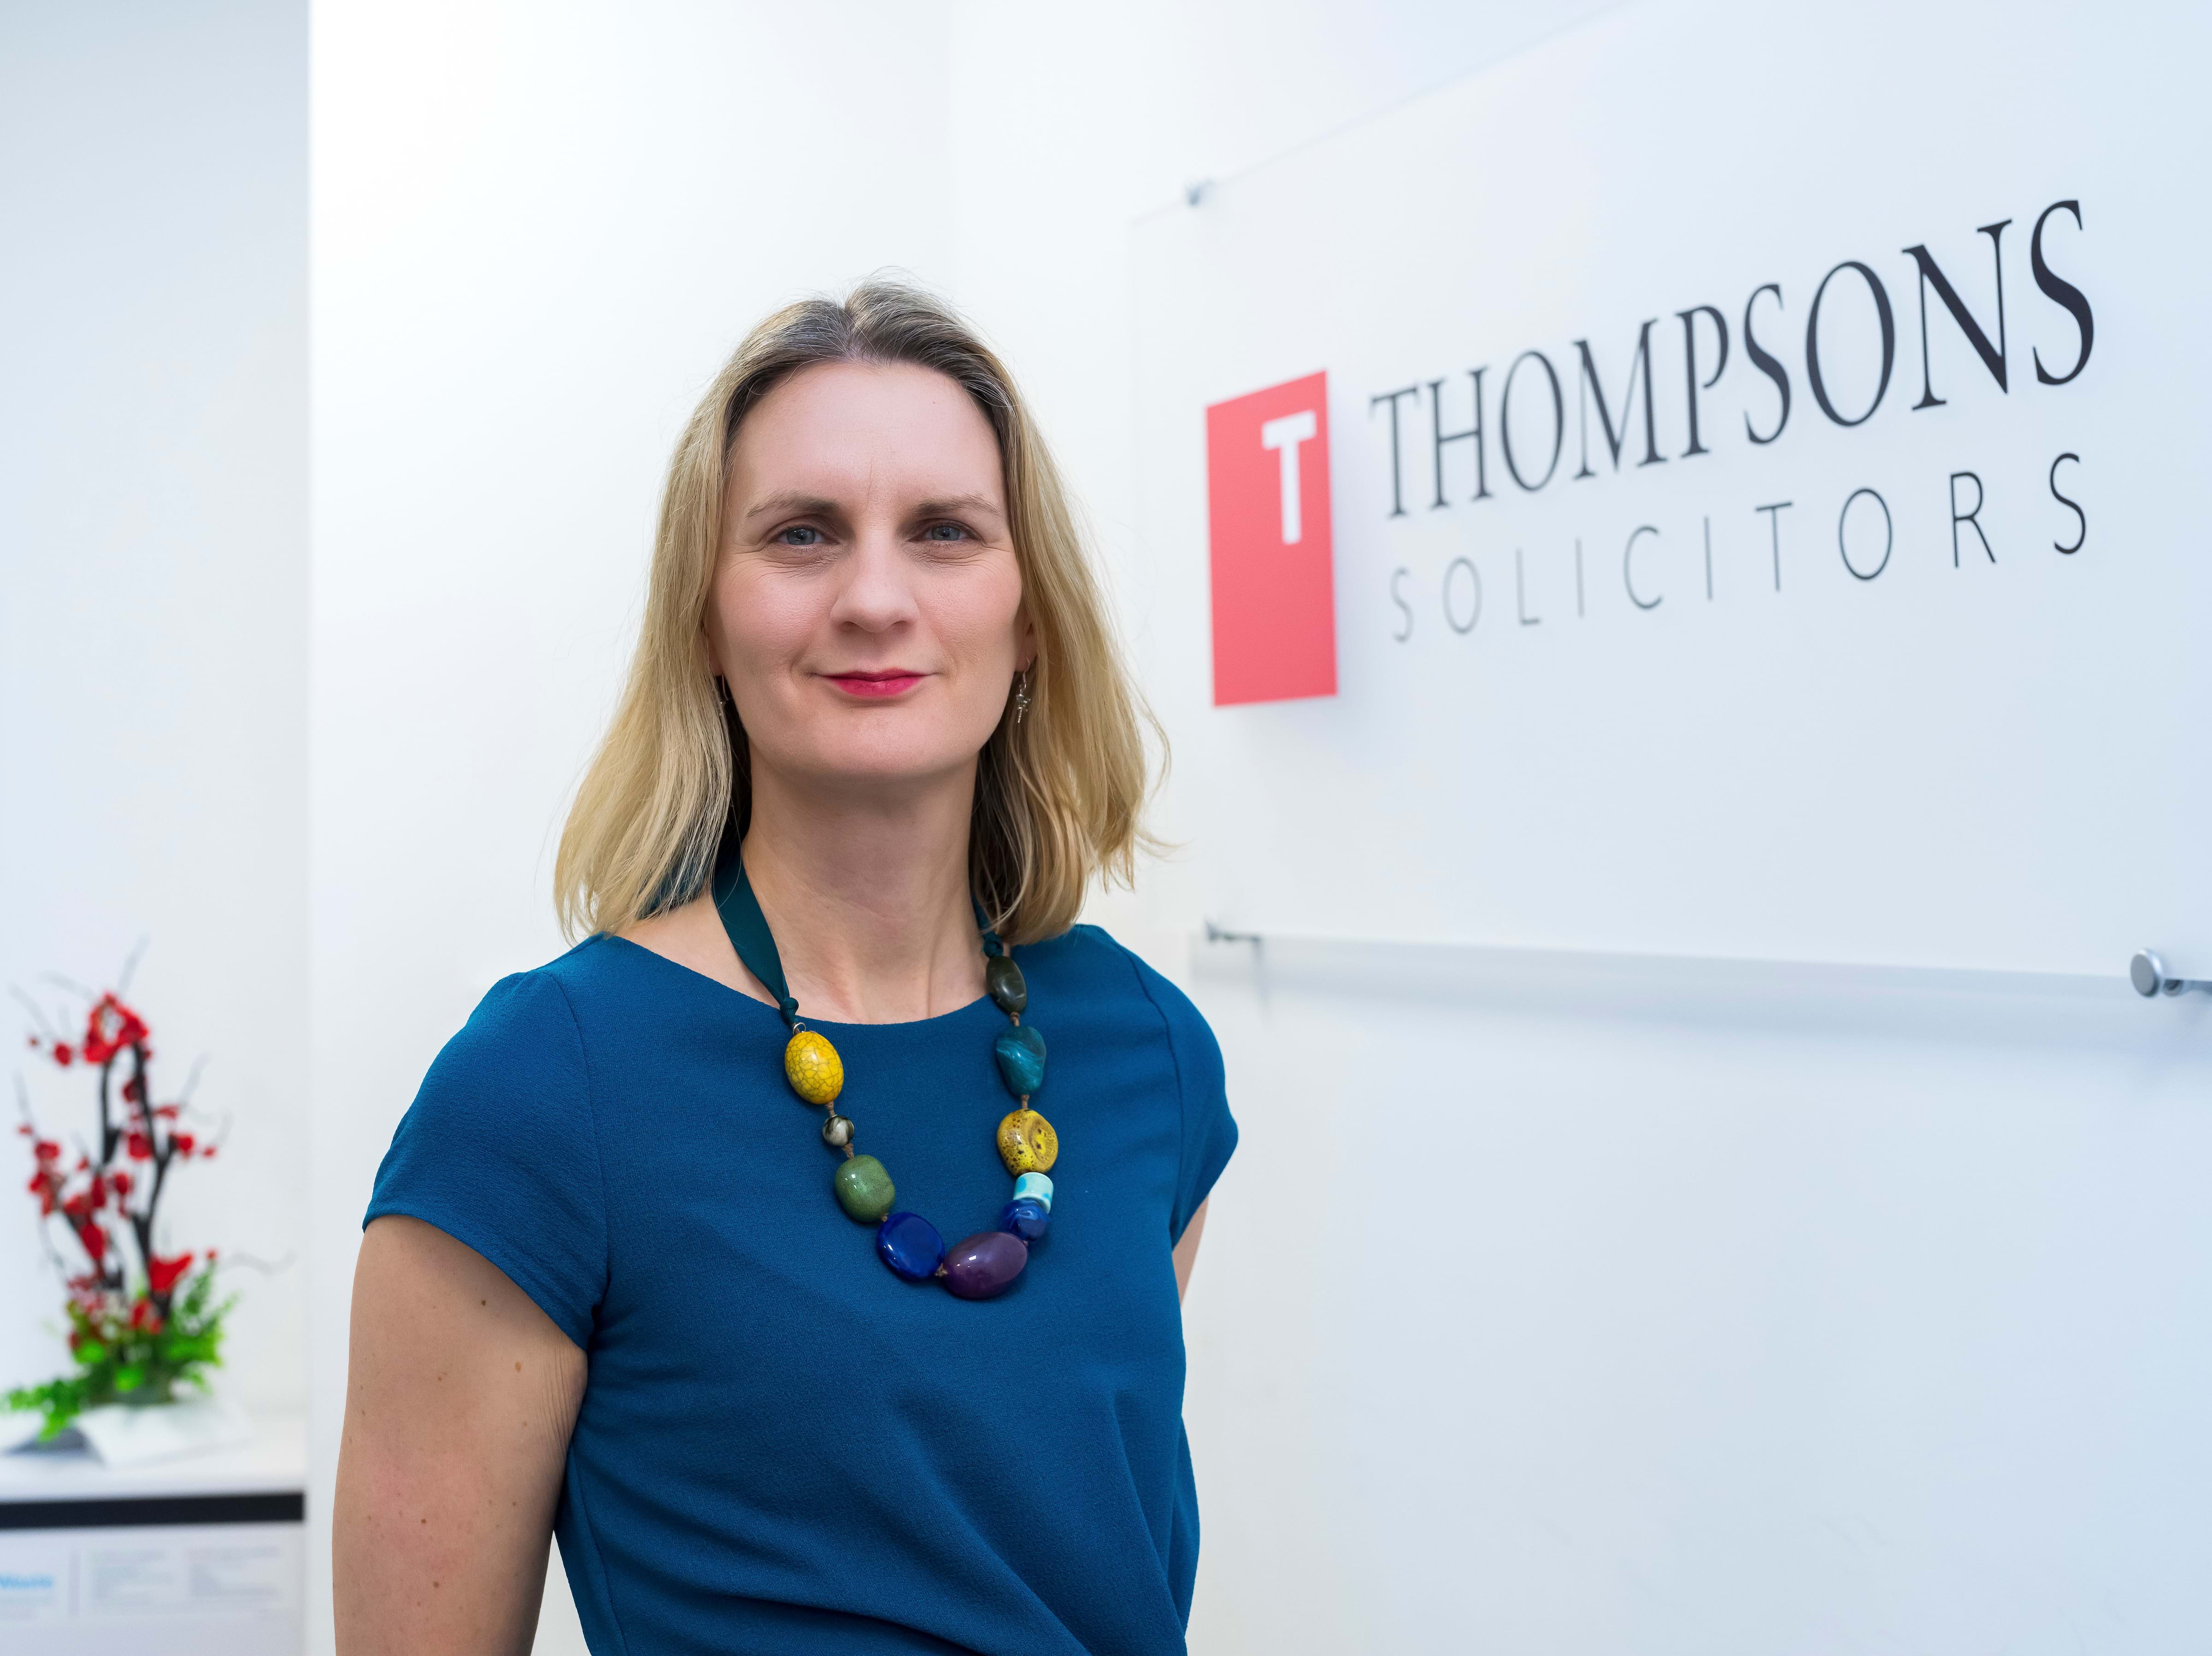 Victoria Gofton, new head of clinical negligence at Thompsons Solicitors.